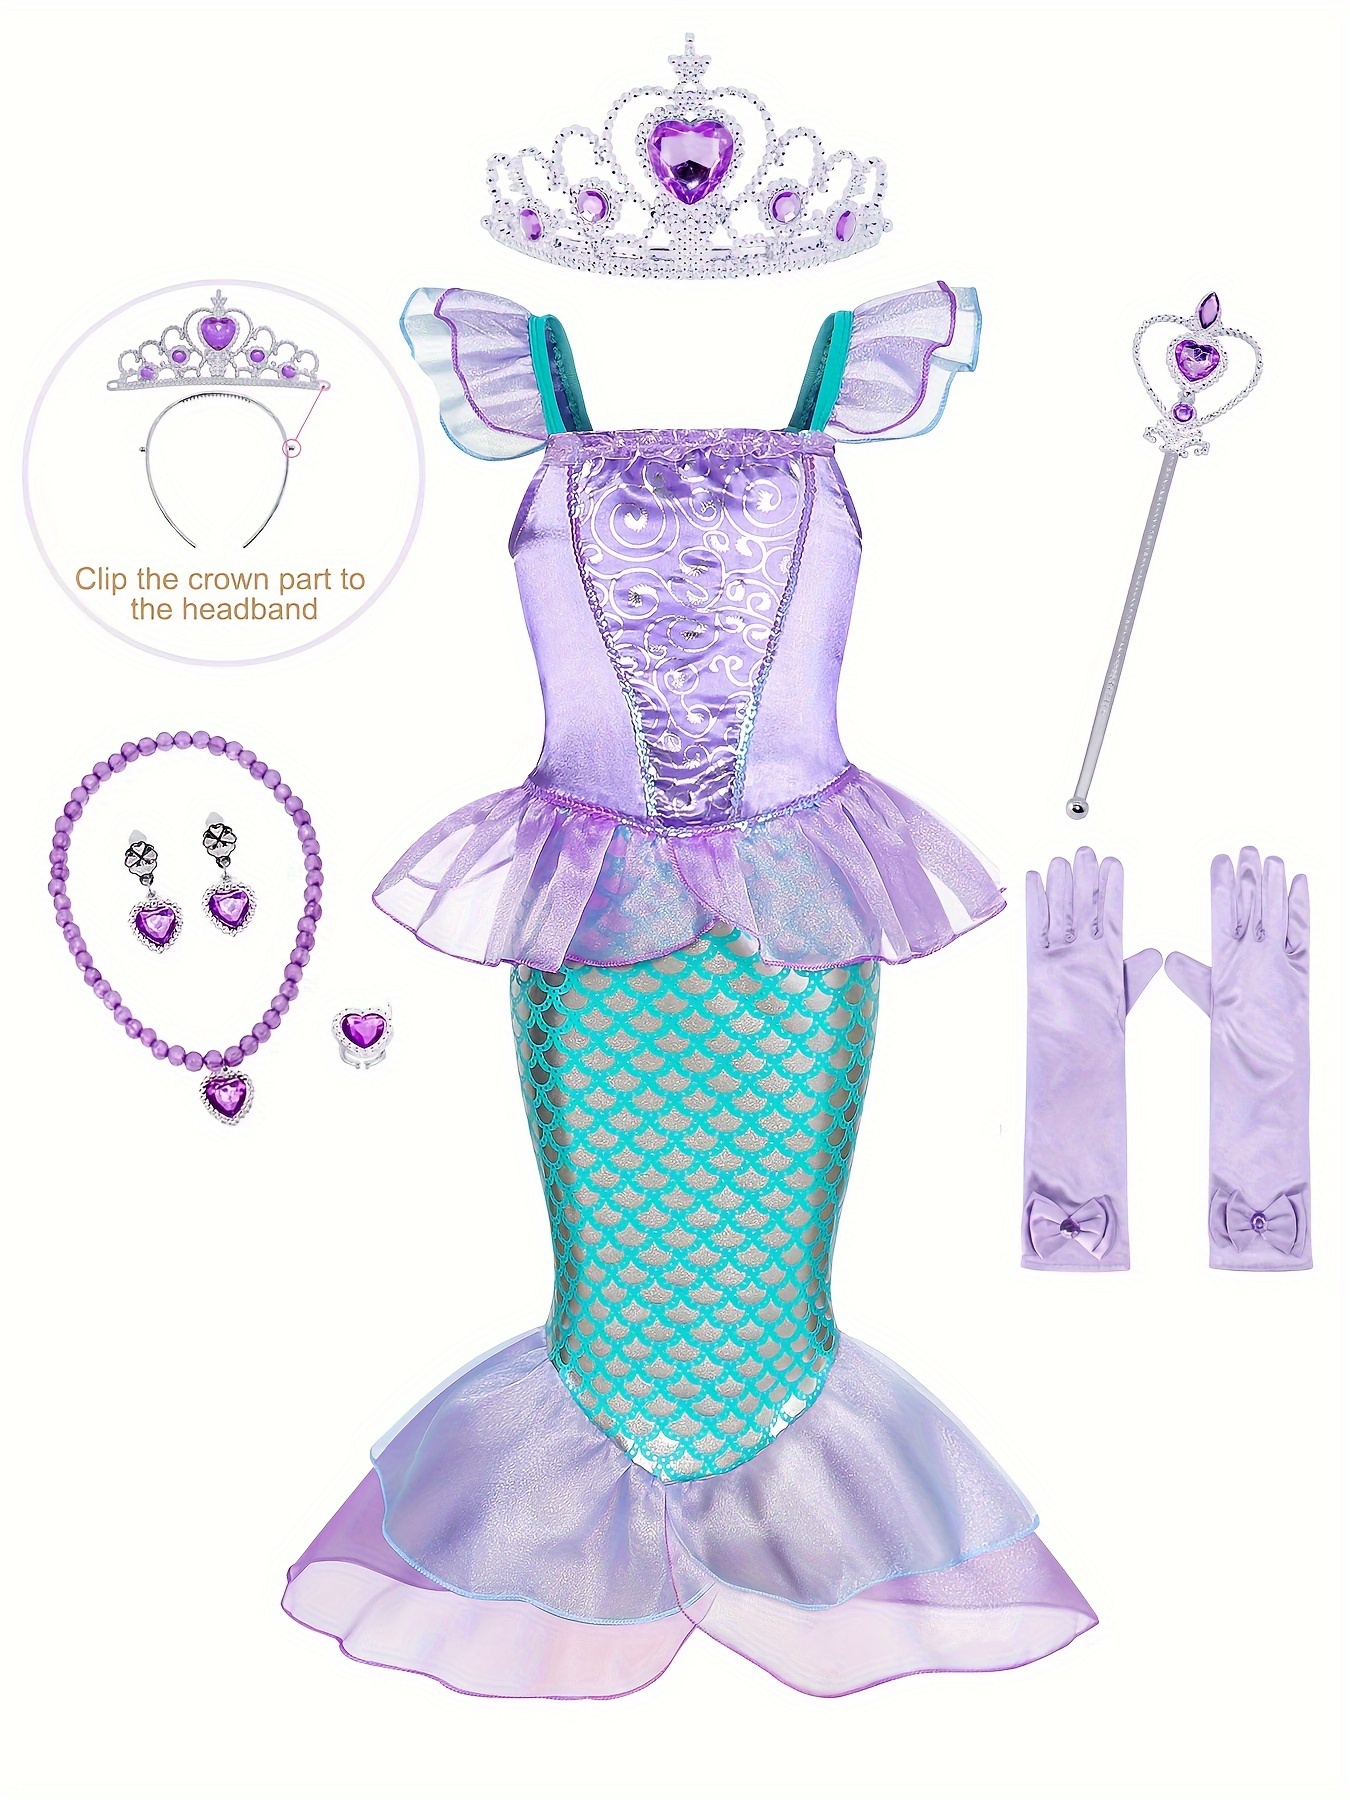 girls princess mermaid dress costume dress up birthday party cosplay outfit kids clothes